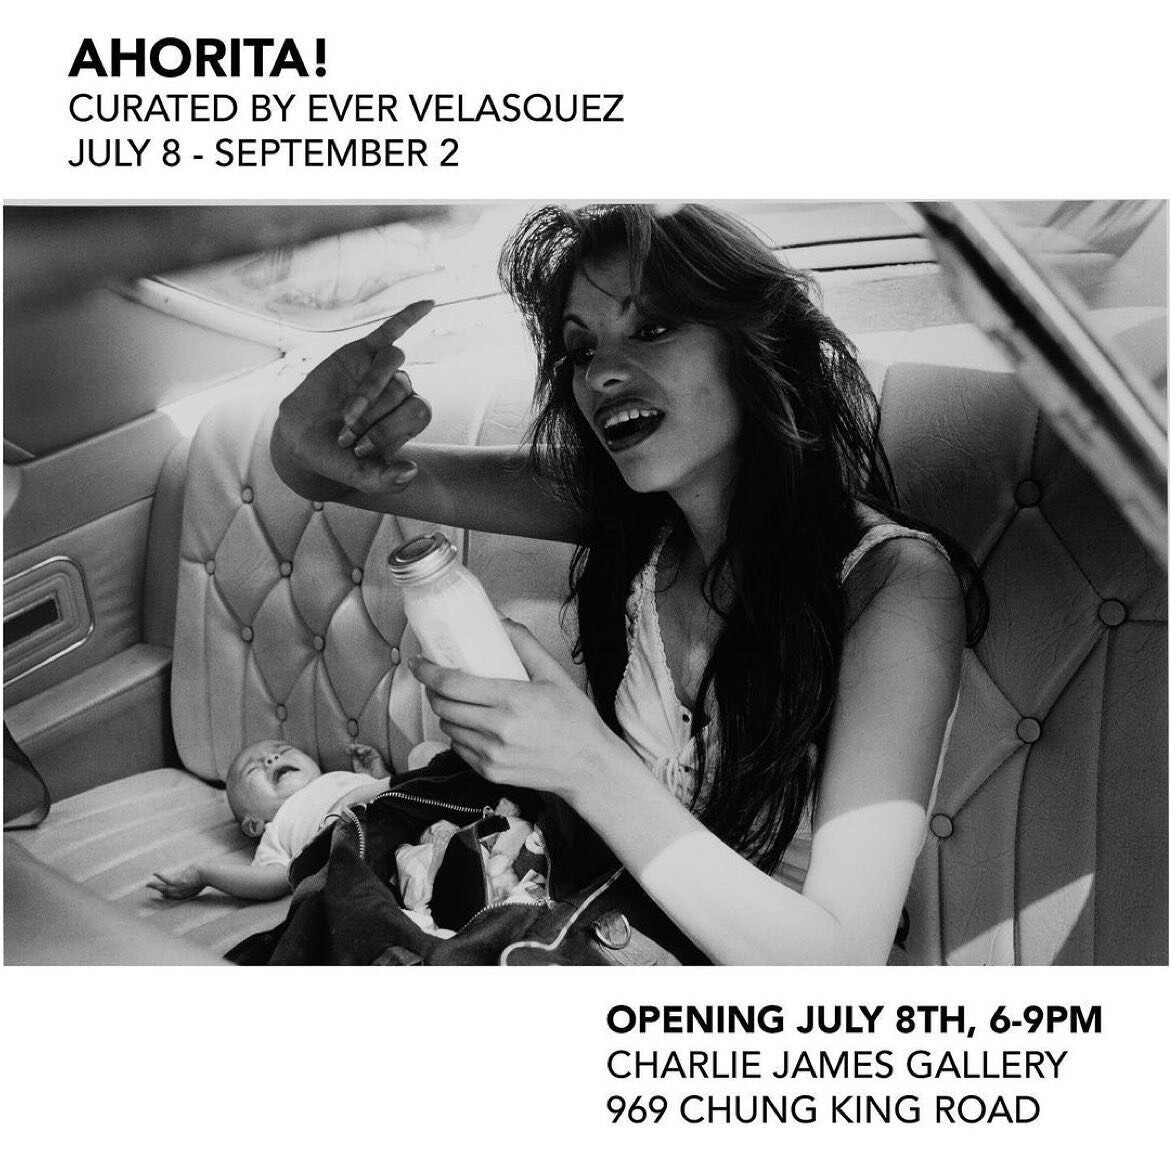 OMG so excited for this! See you all Saturday!! Gracias por incluirme @ever.a.k.a.thegirlabouttown 
&bull;
Ahorita!
Curated by Ever Velasquez

969 CHUNG KING ROAD
JULY 8 - SEPTEMBER 2, 2023

Charlie James Gallery is pleased to present Ahorita!, a gro